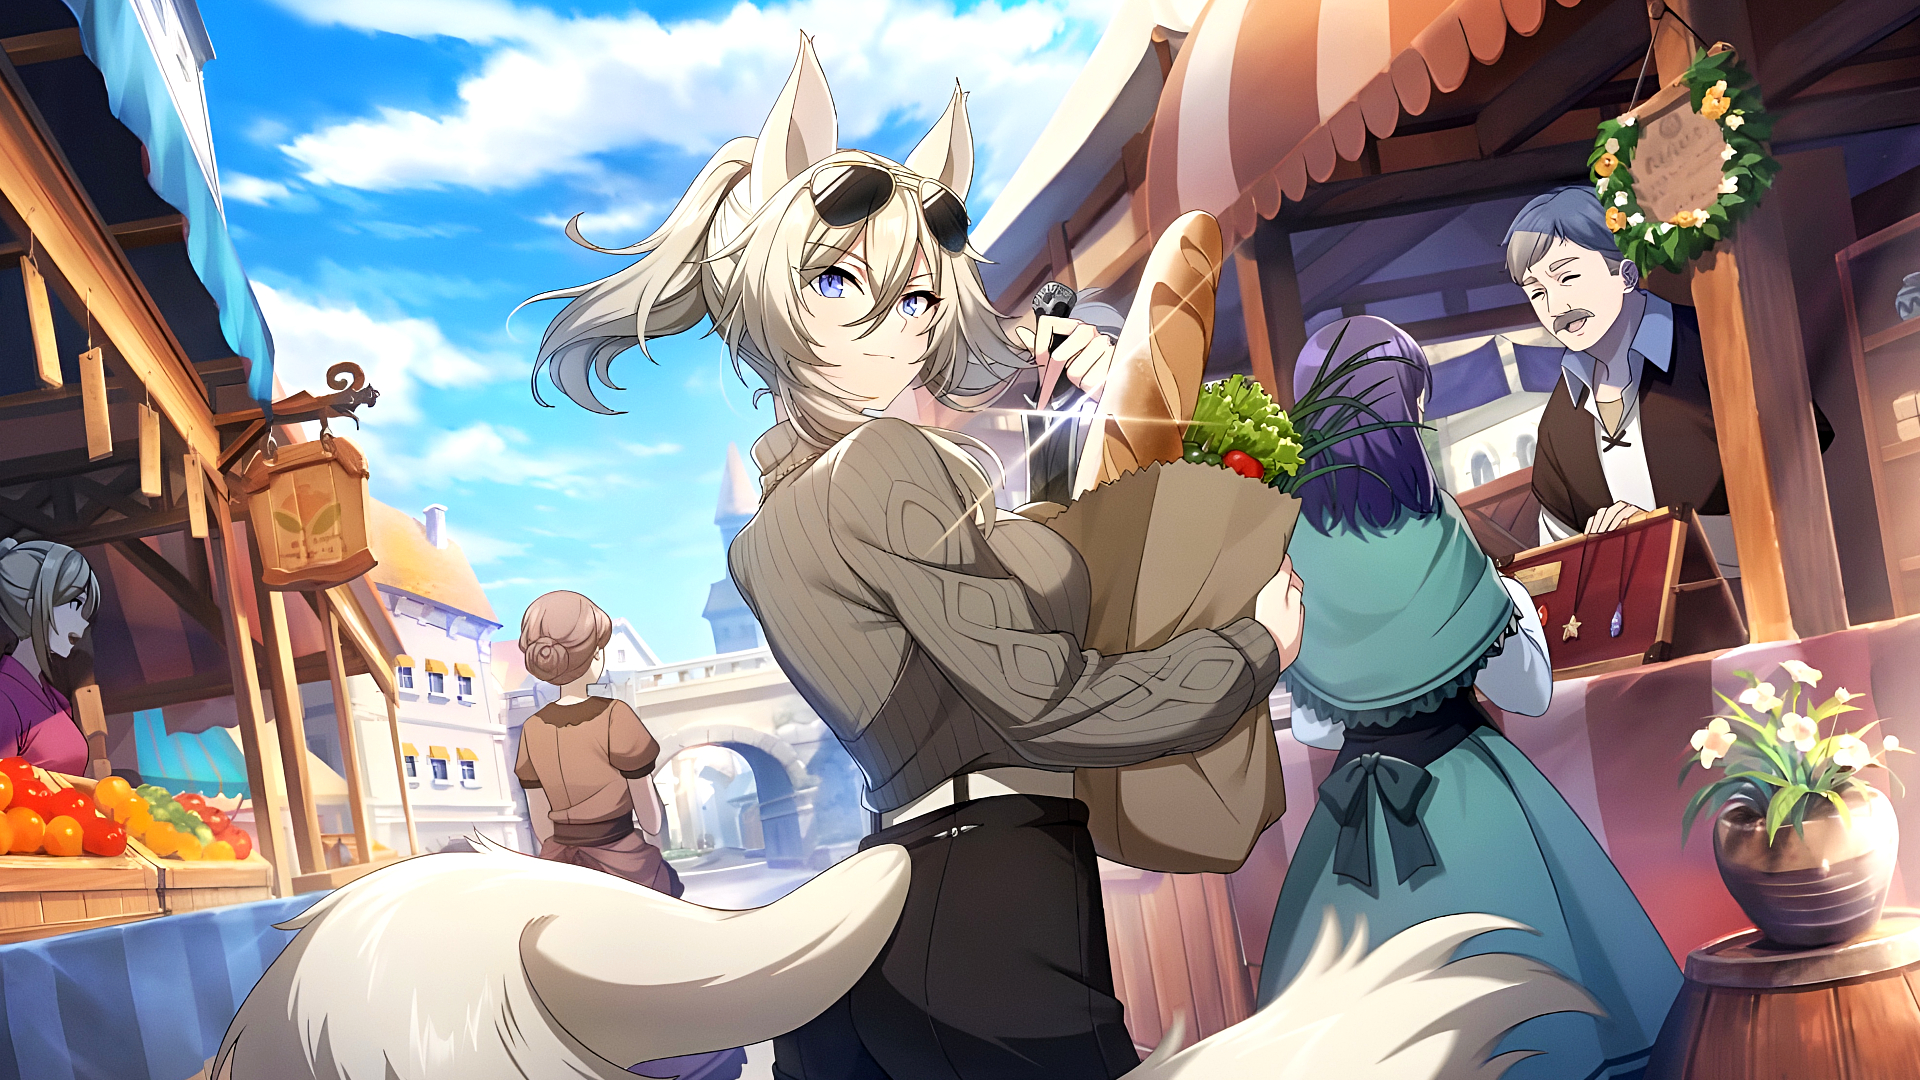 Anime 1920x1080 The Eminence in Shadow anime Shadow Garden Zeta looking at viewer anime girls daylight fox ears clouds bag fox tail bread sky fox girl closed mouth sunglasses ponytail short hair blue eyes blonde sweater shopping bags shopping vases flowers fruit